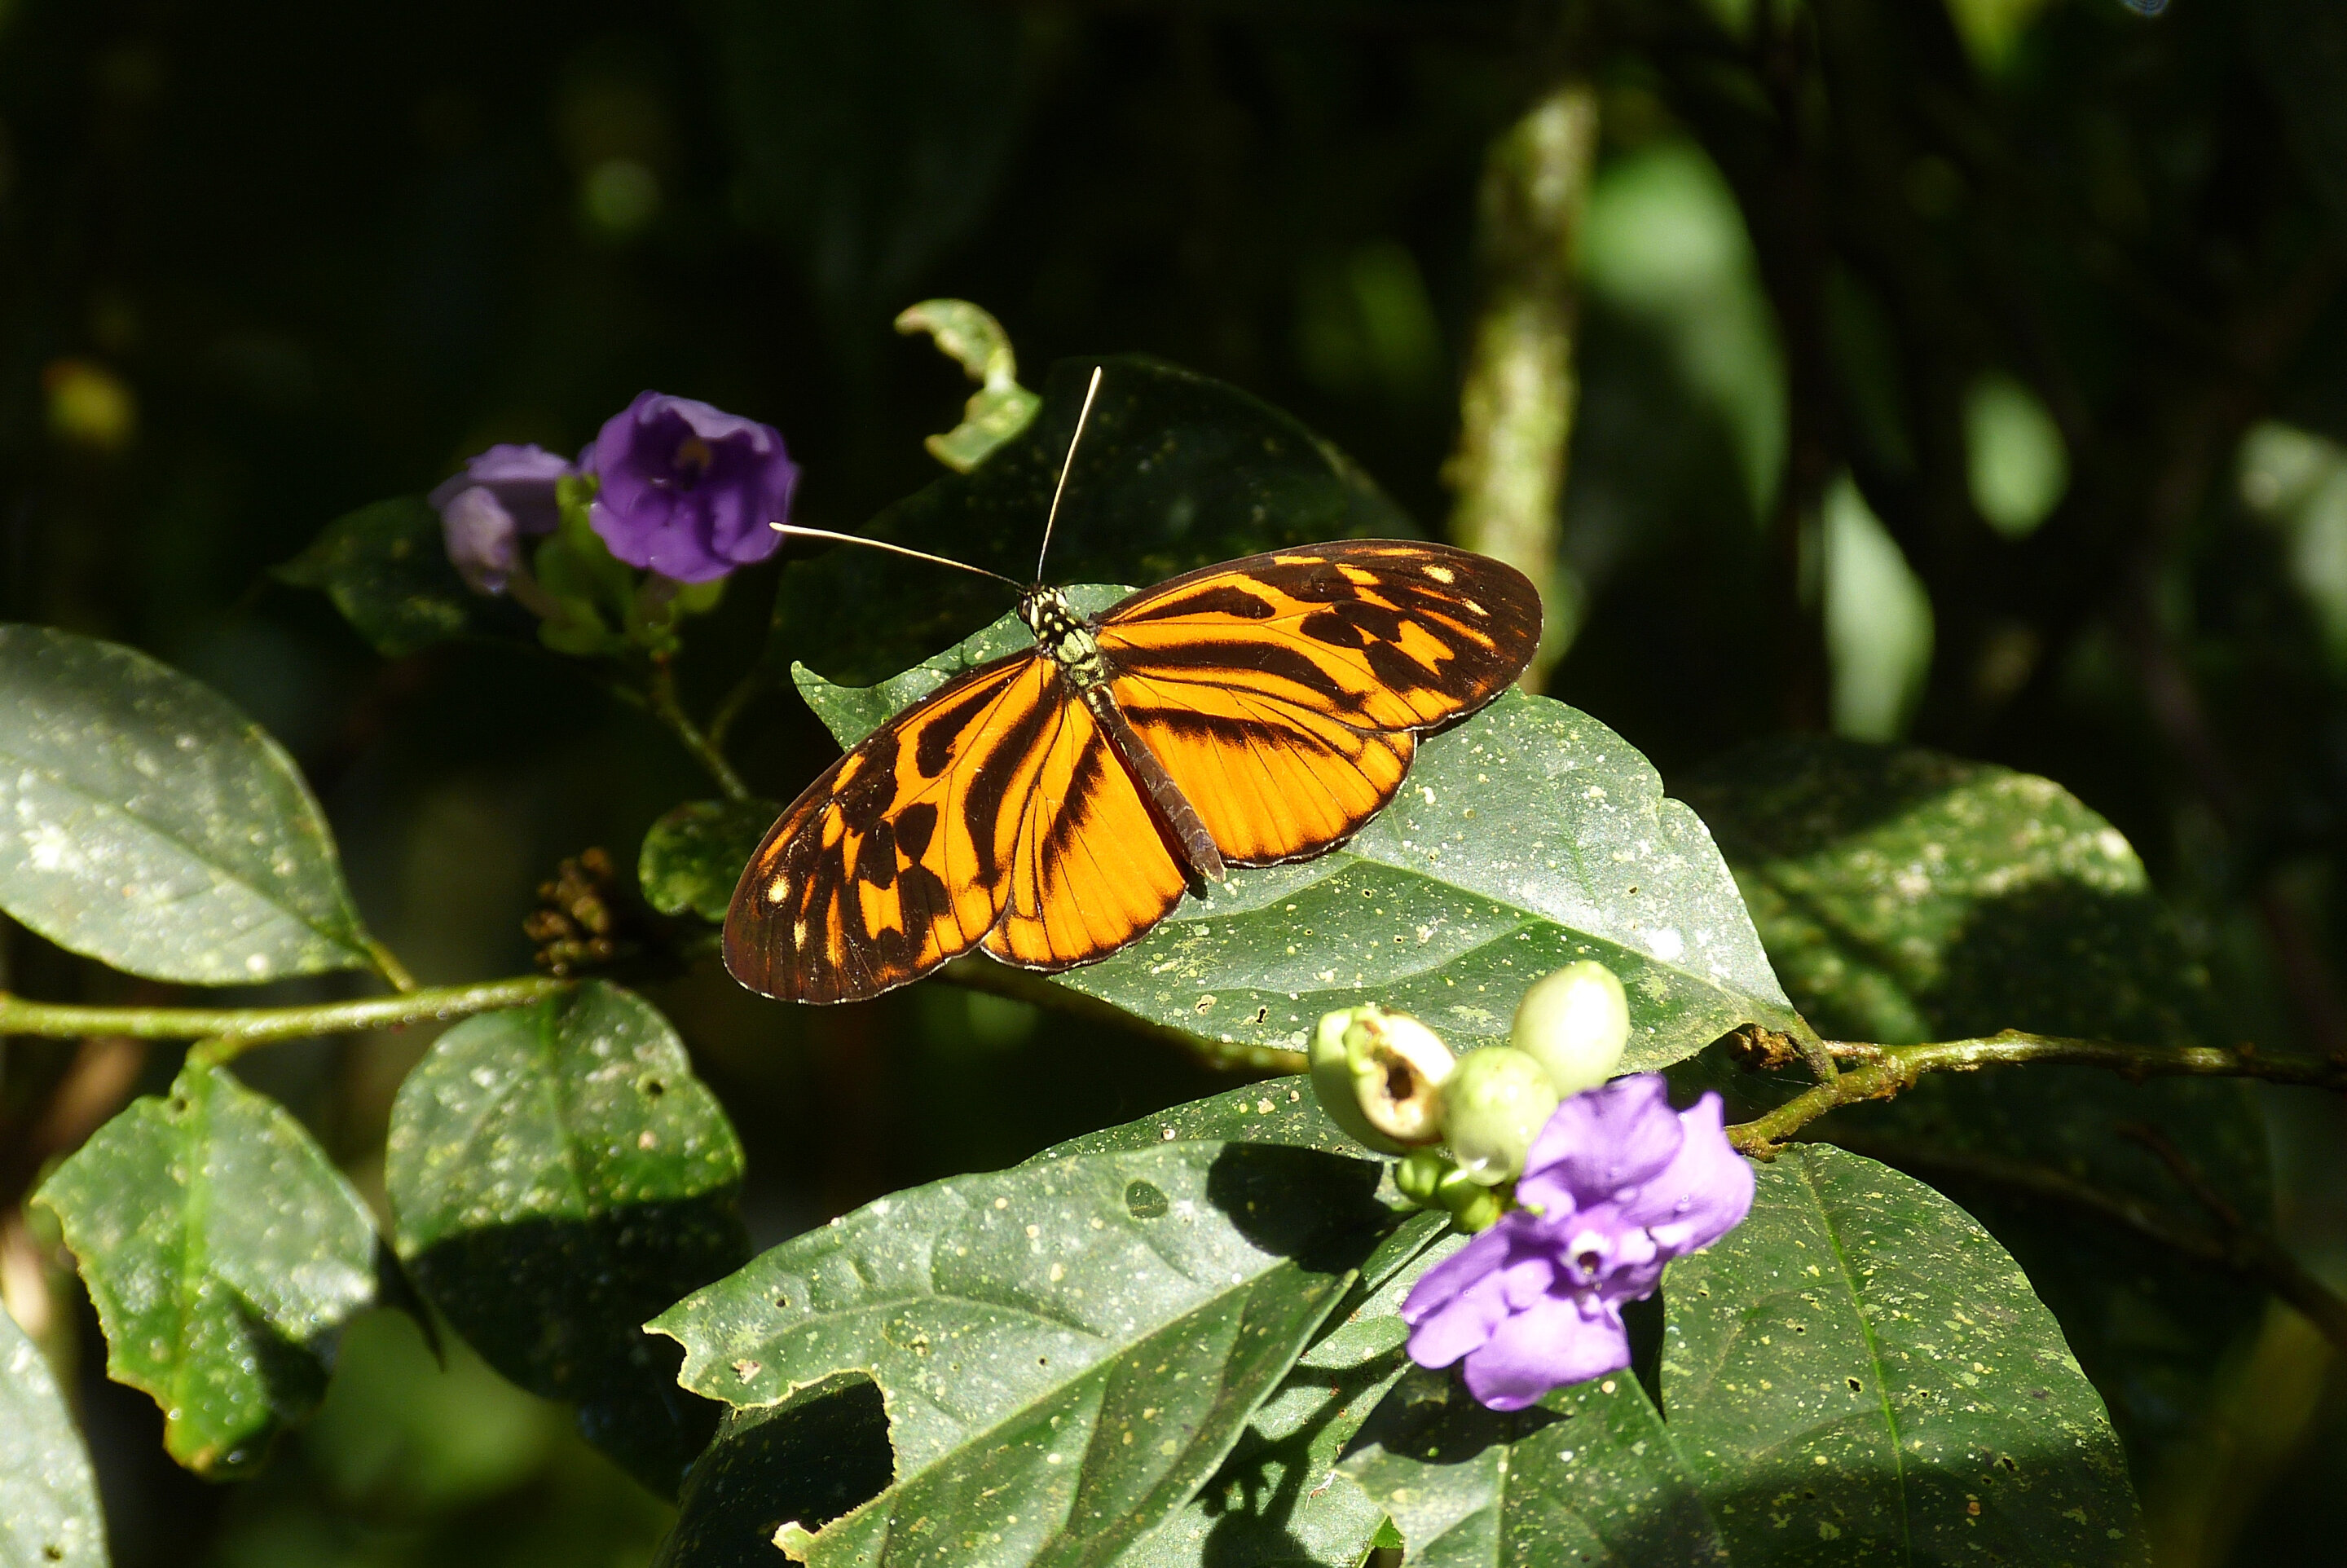 Amazon butterflies show how new species can evolve from hybridization